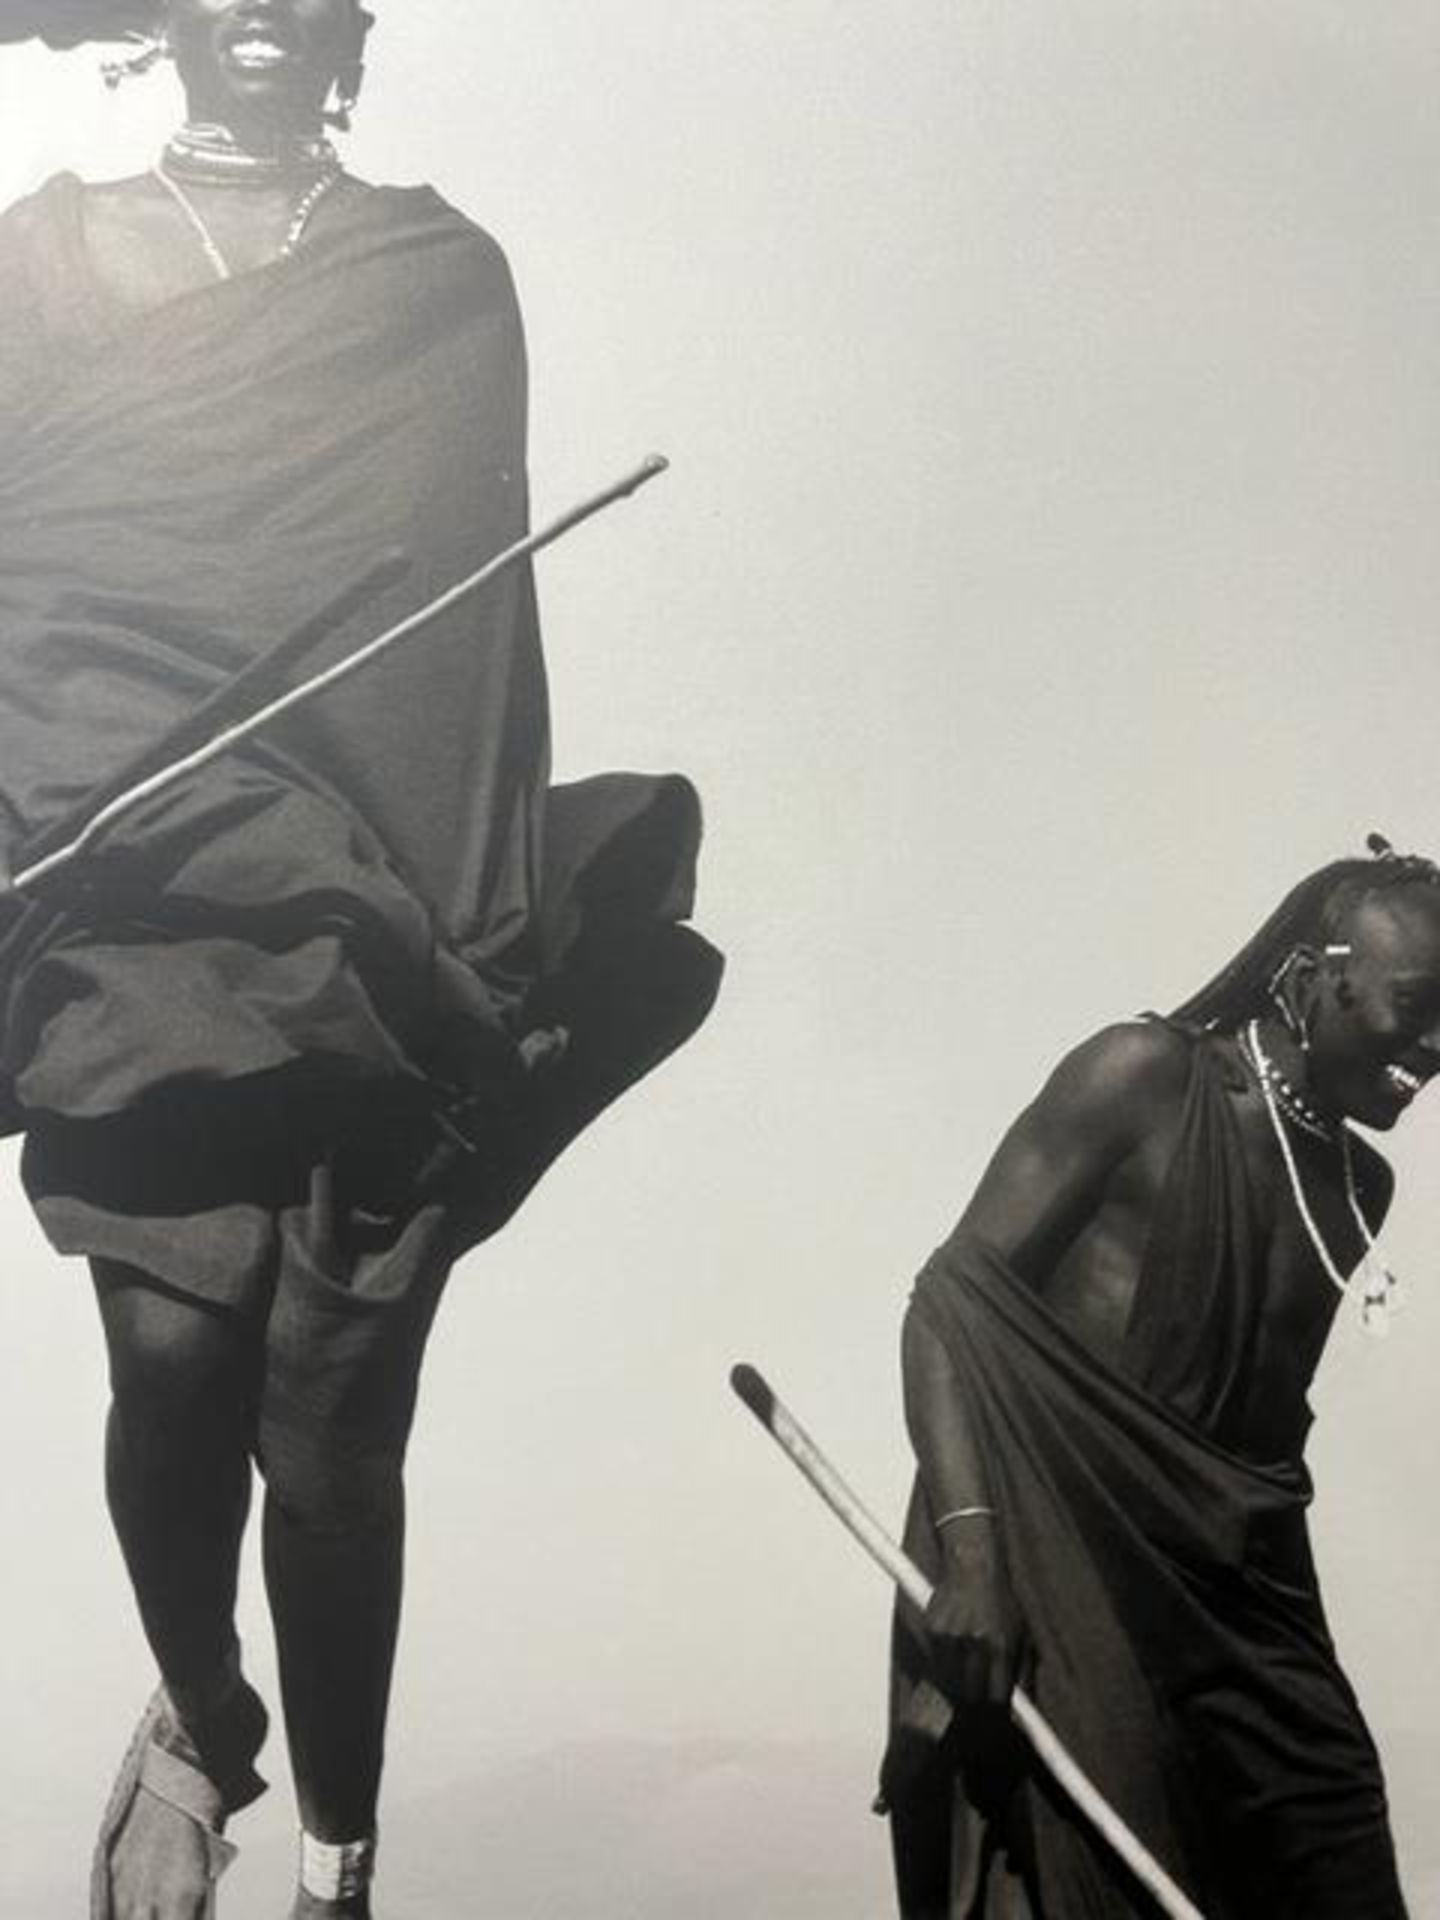 Herb Ritts "Untitled" Print. - Image 4 of 6